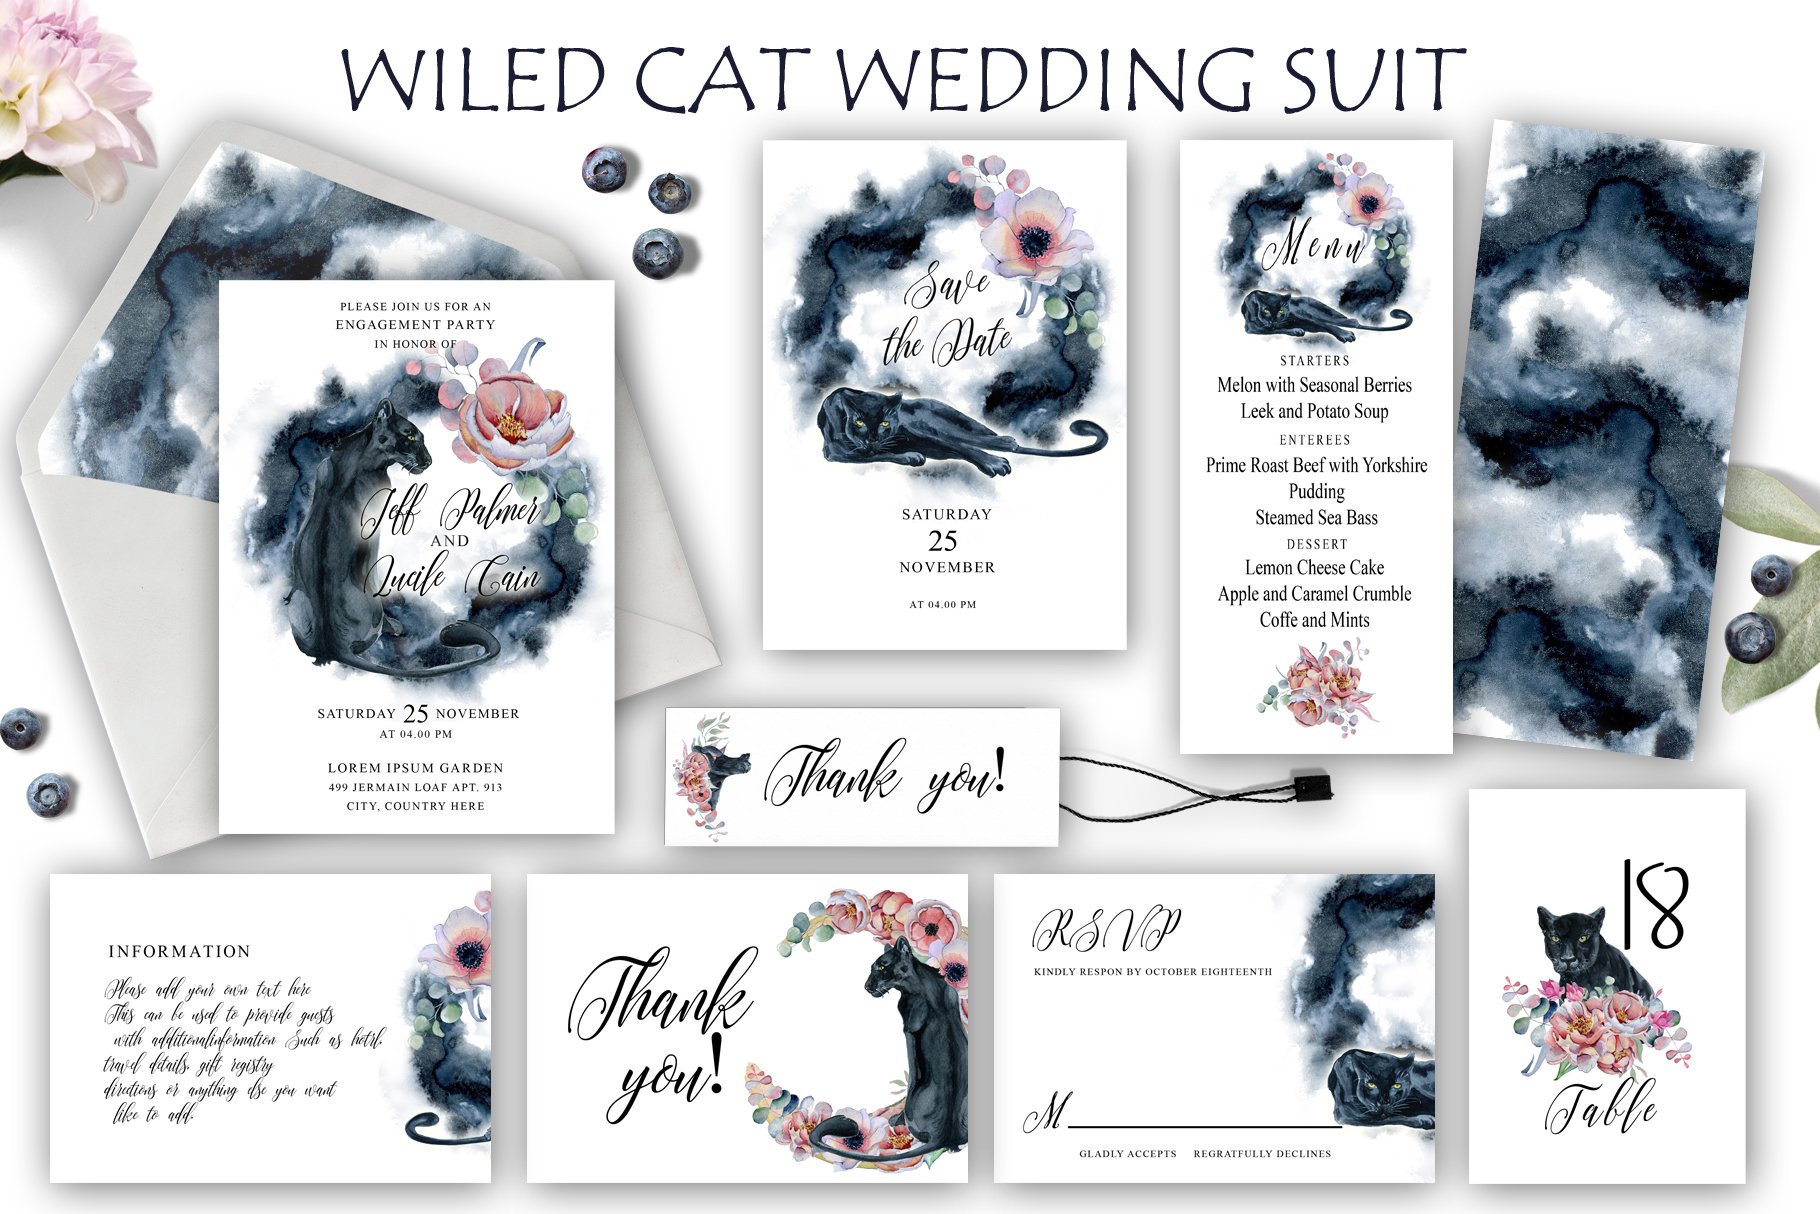 wiled cats wedding suit